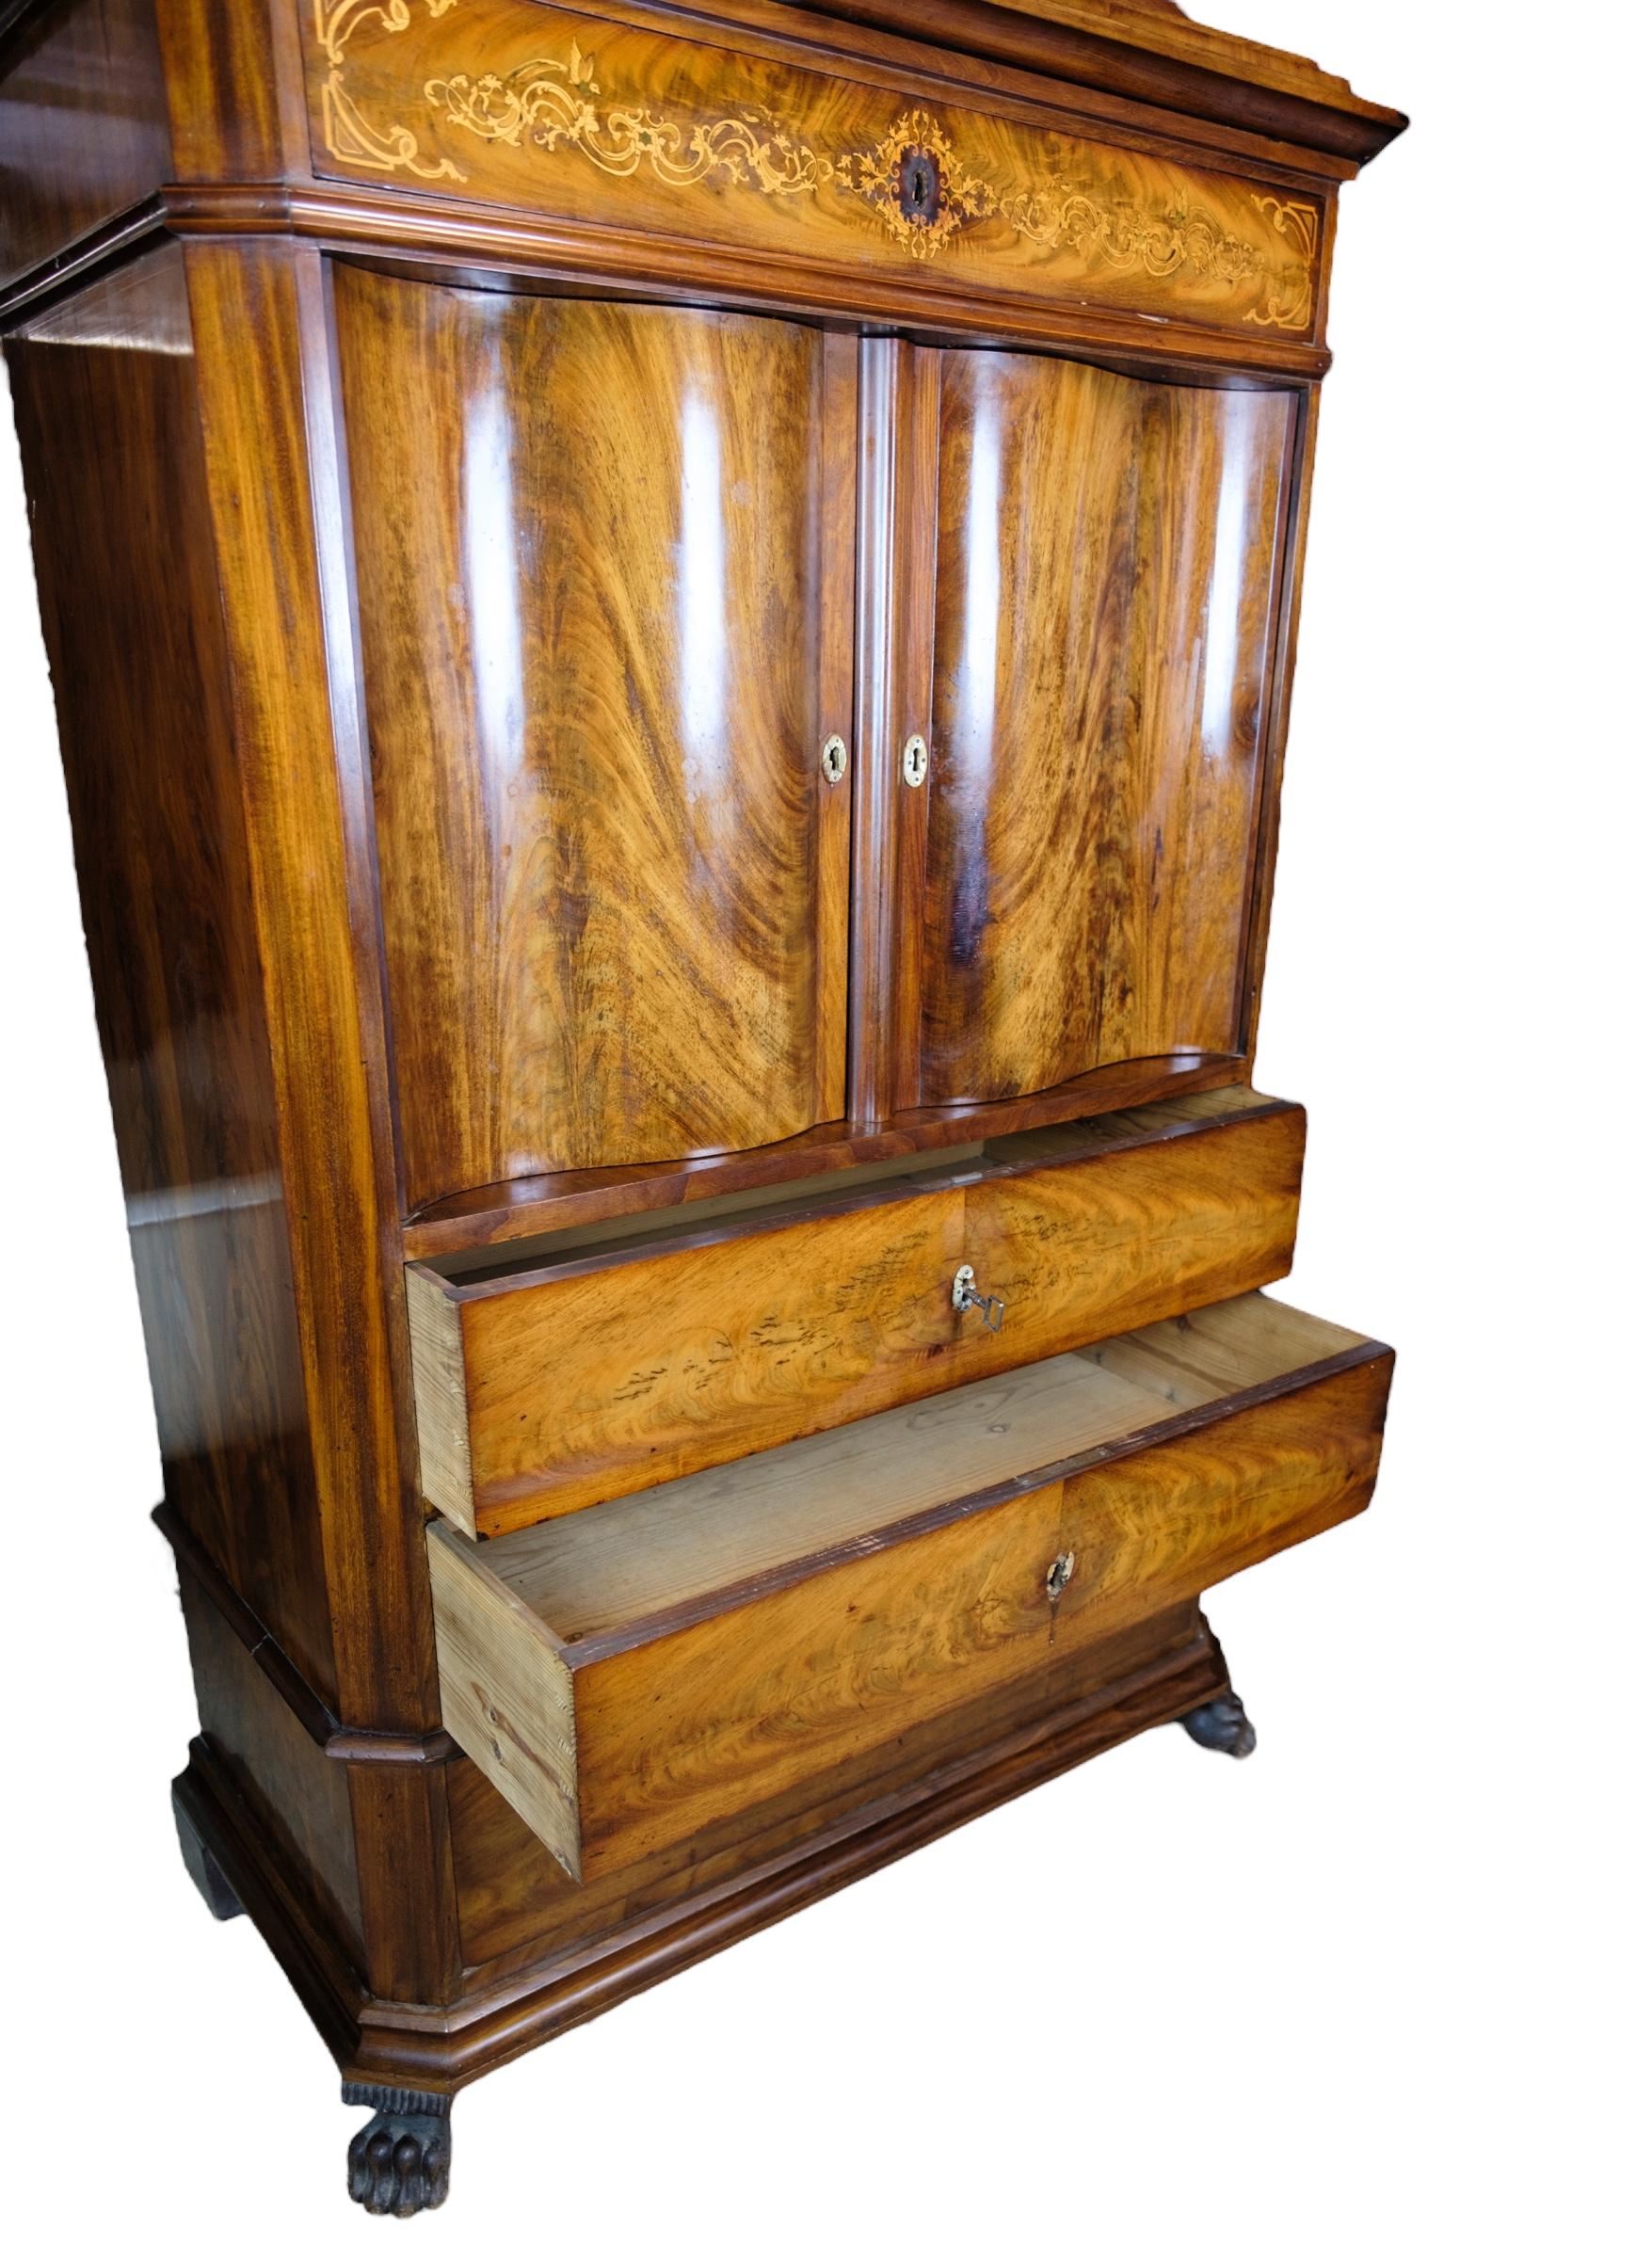 Large cabinet of polished mahogany and walnut decorated with intarsia, drawers at the bottom and doors with internal shelf from around the year 1880.
Measurements in cm: H:170 W:105 D:47